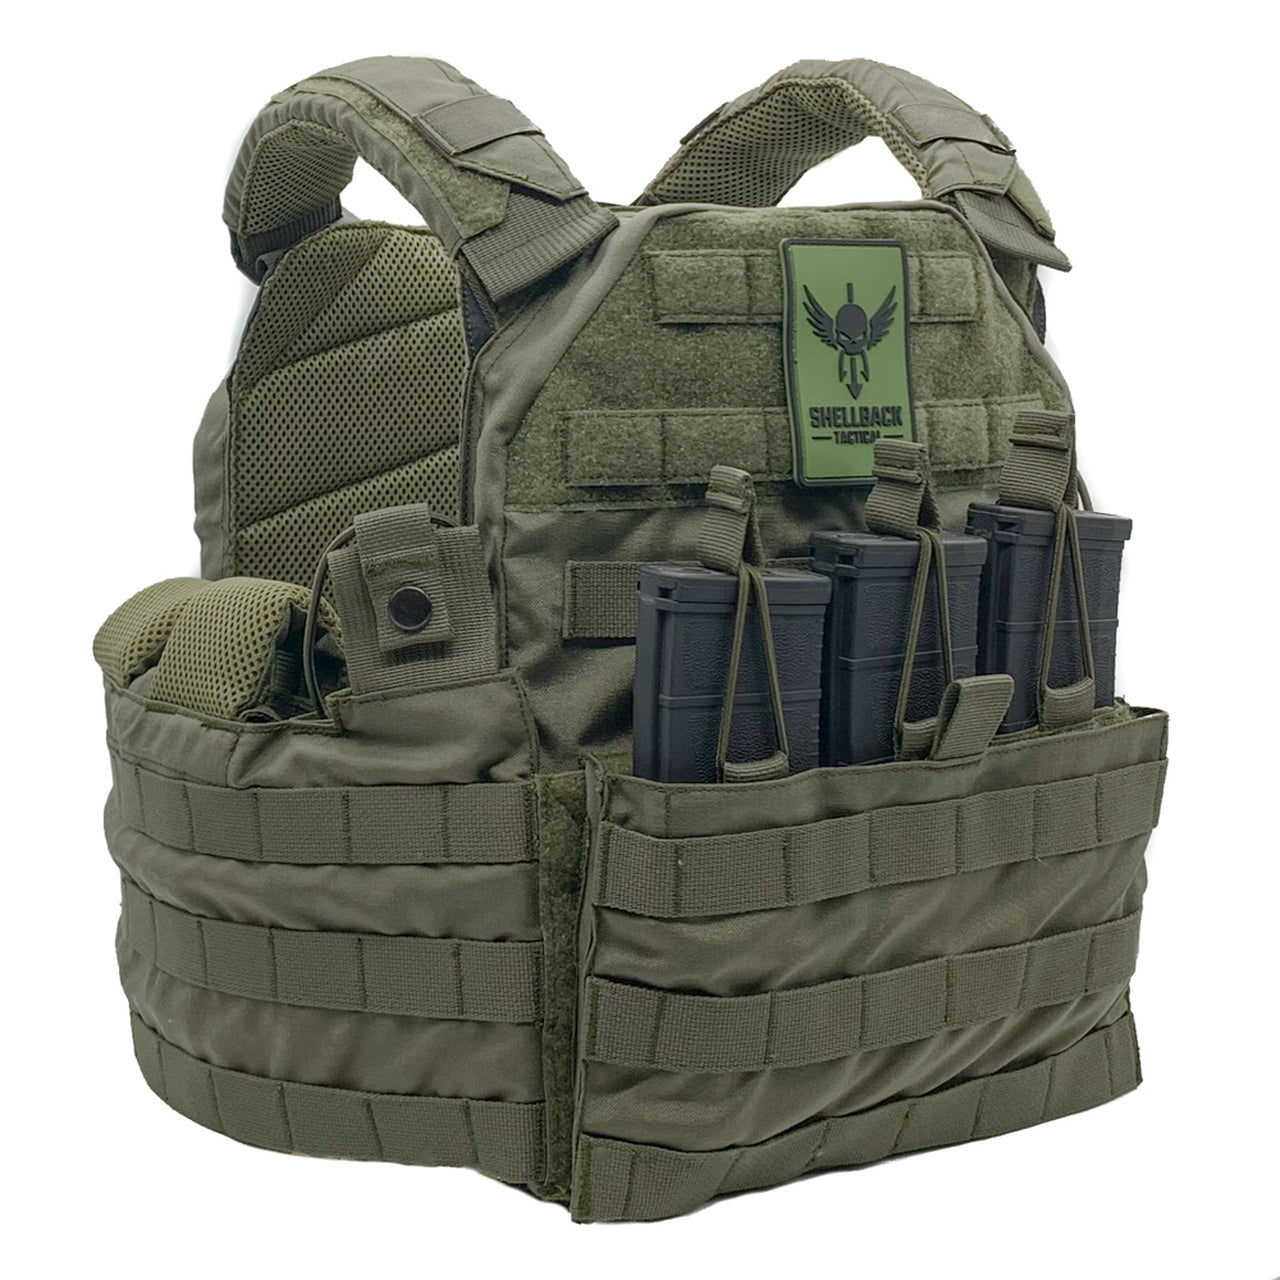 A Shellback Tactical SF Plate Carrier with a number of compartments, designed for combat readiness.